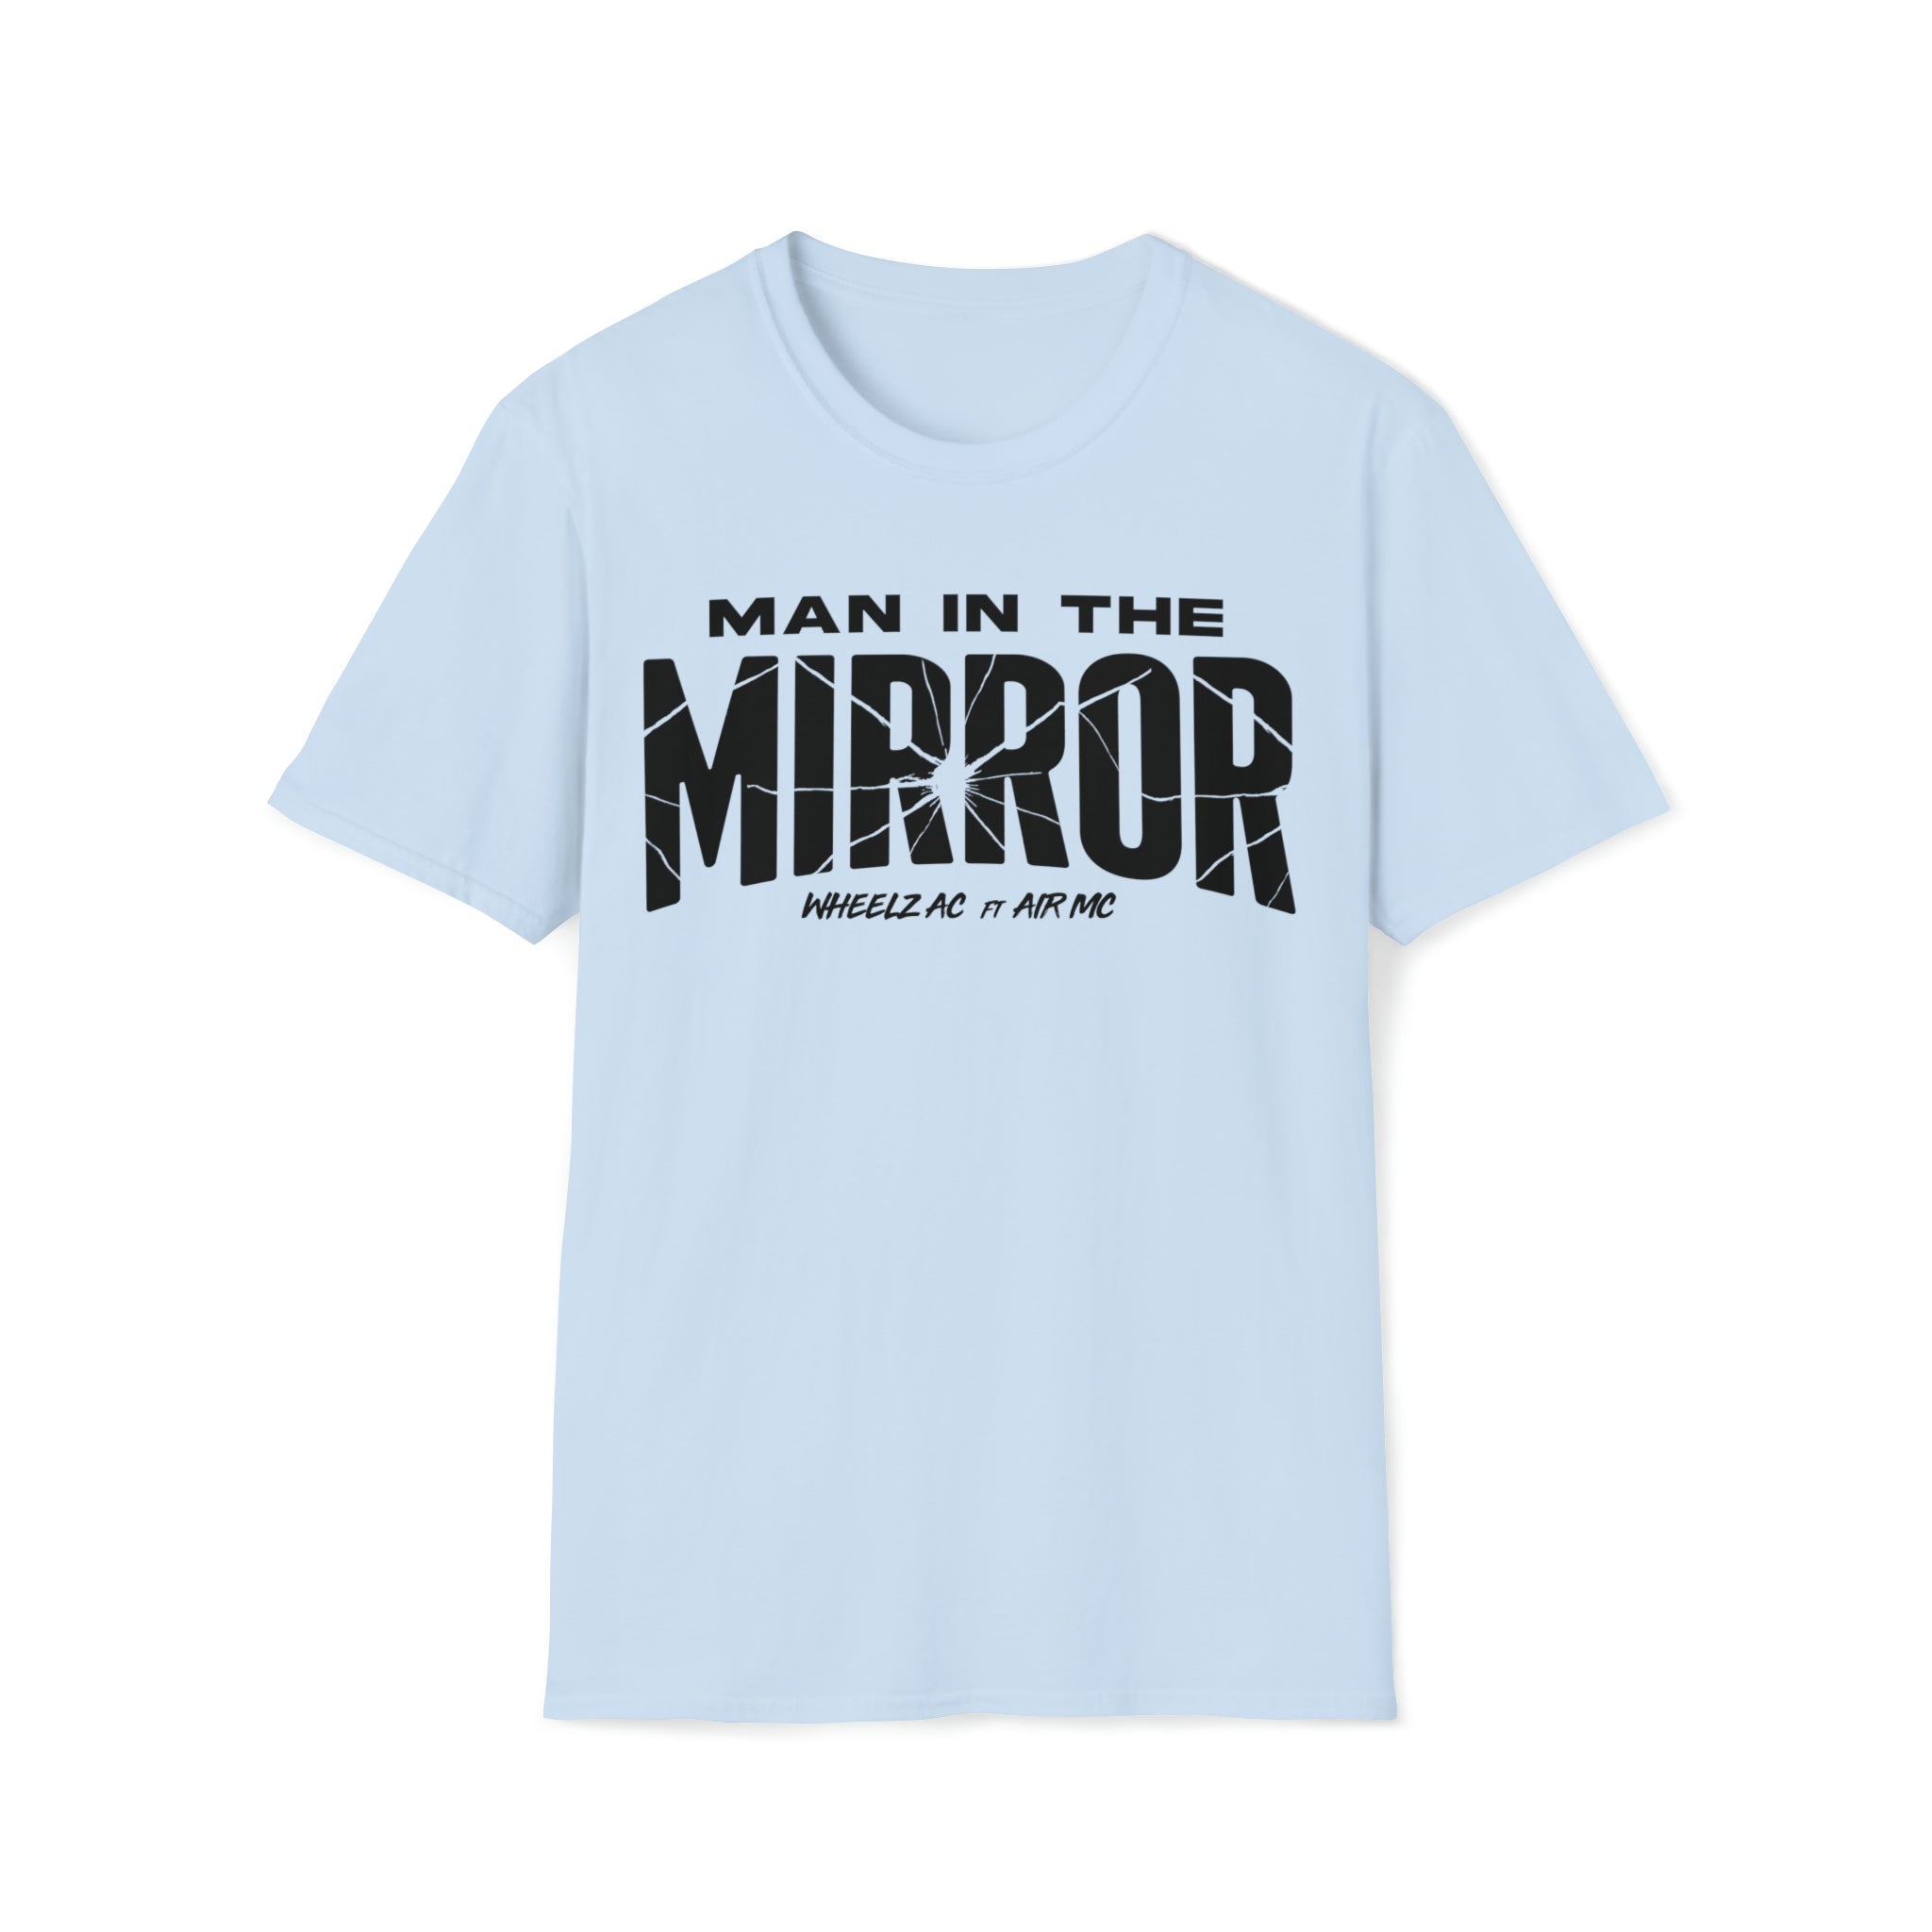 MAN IN THE MIRROR T-Shirt